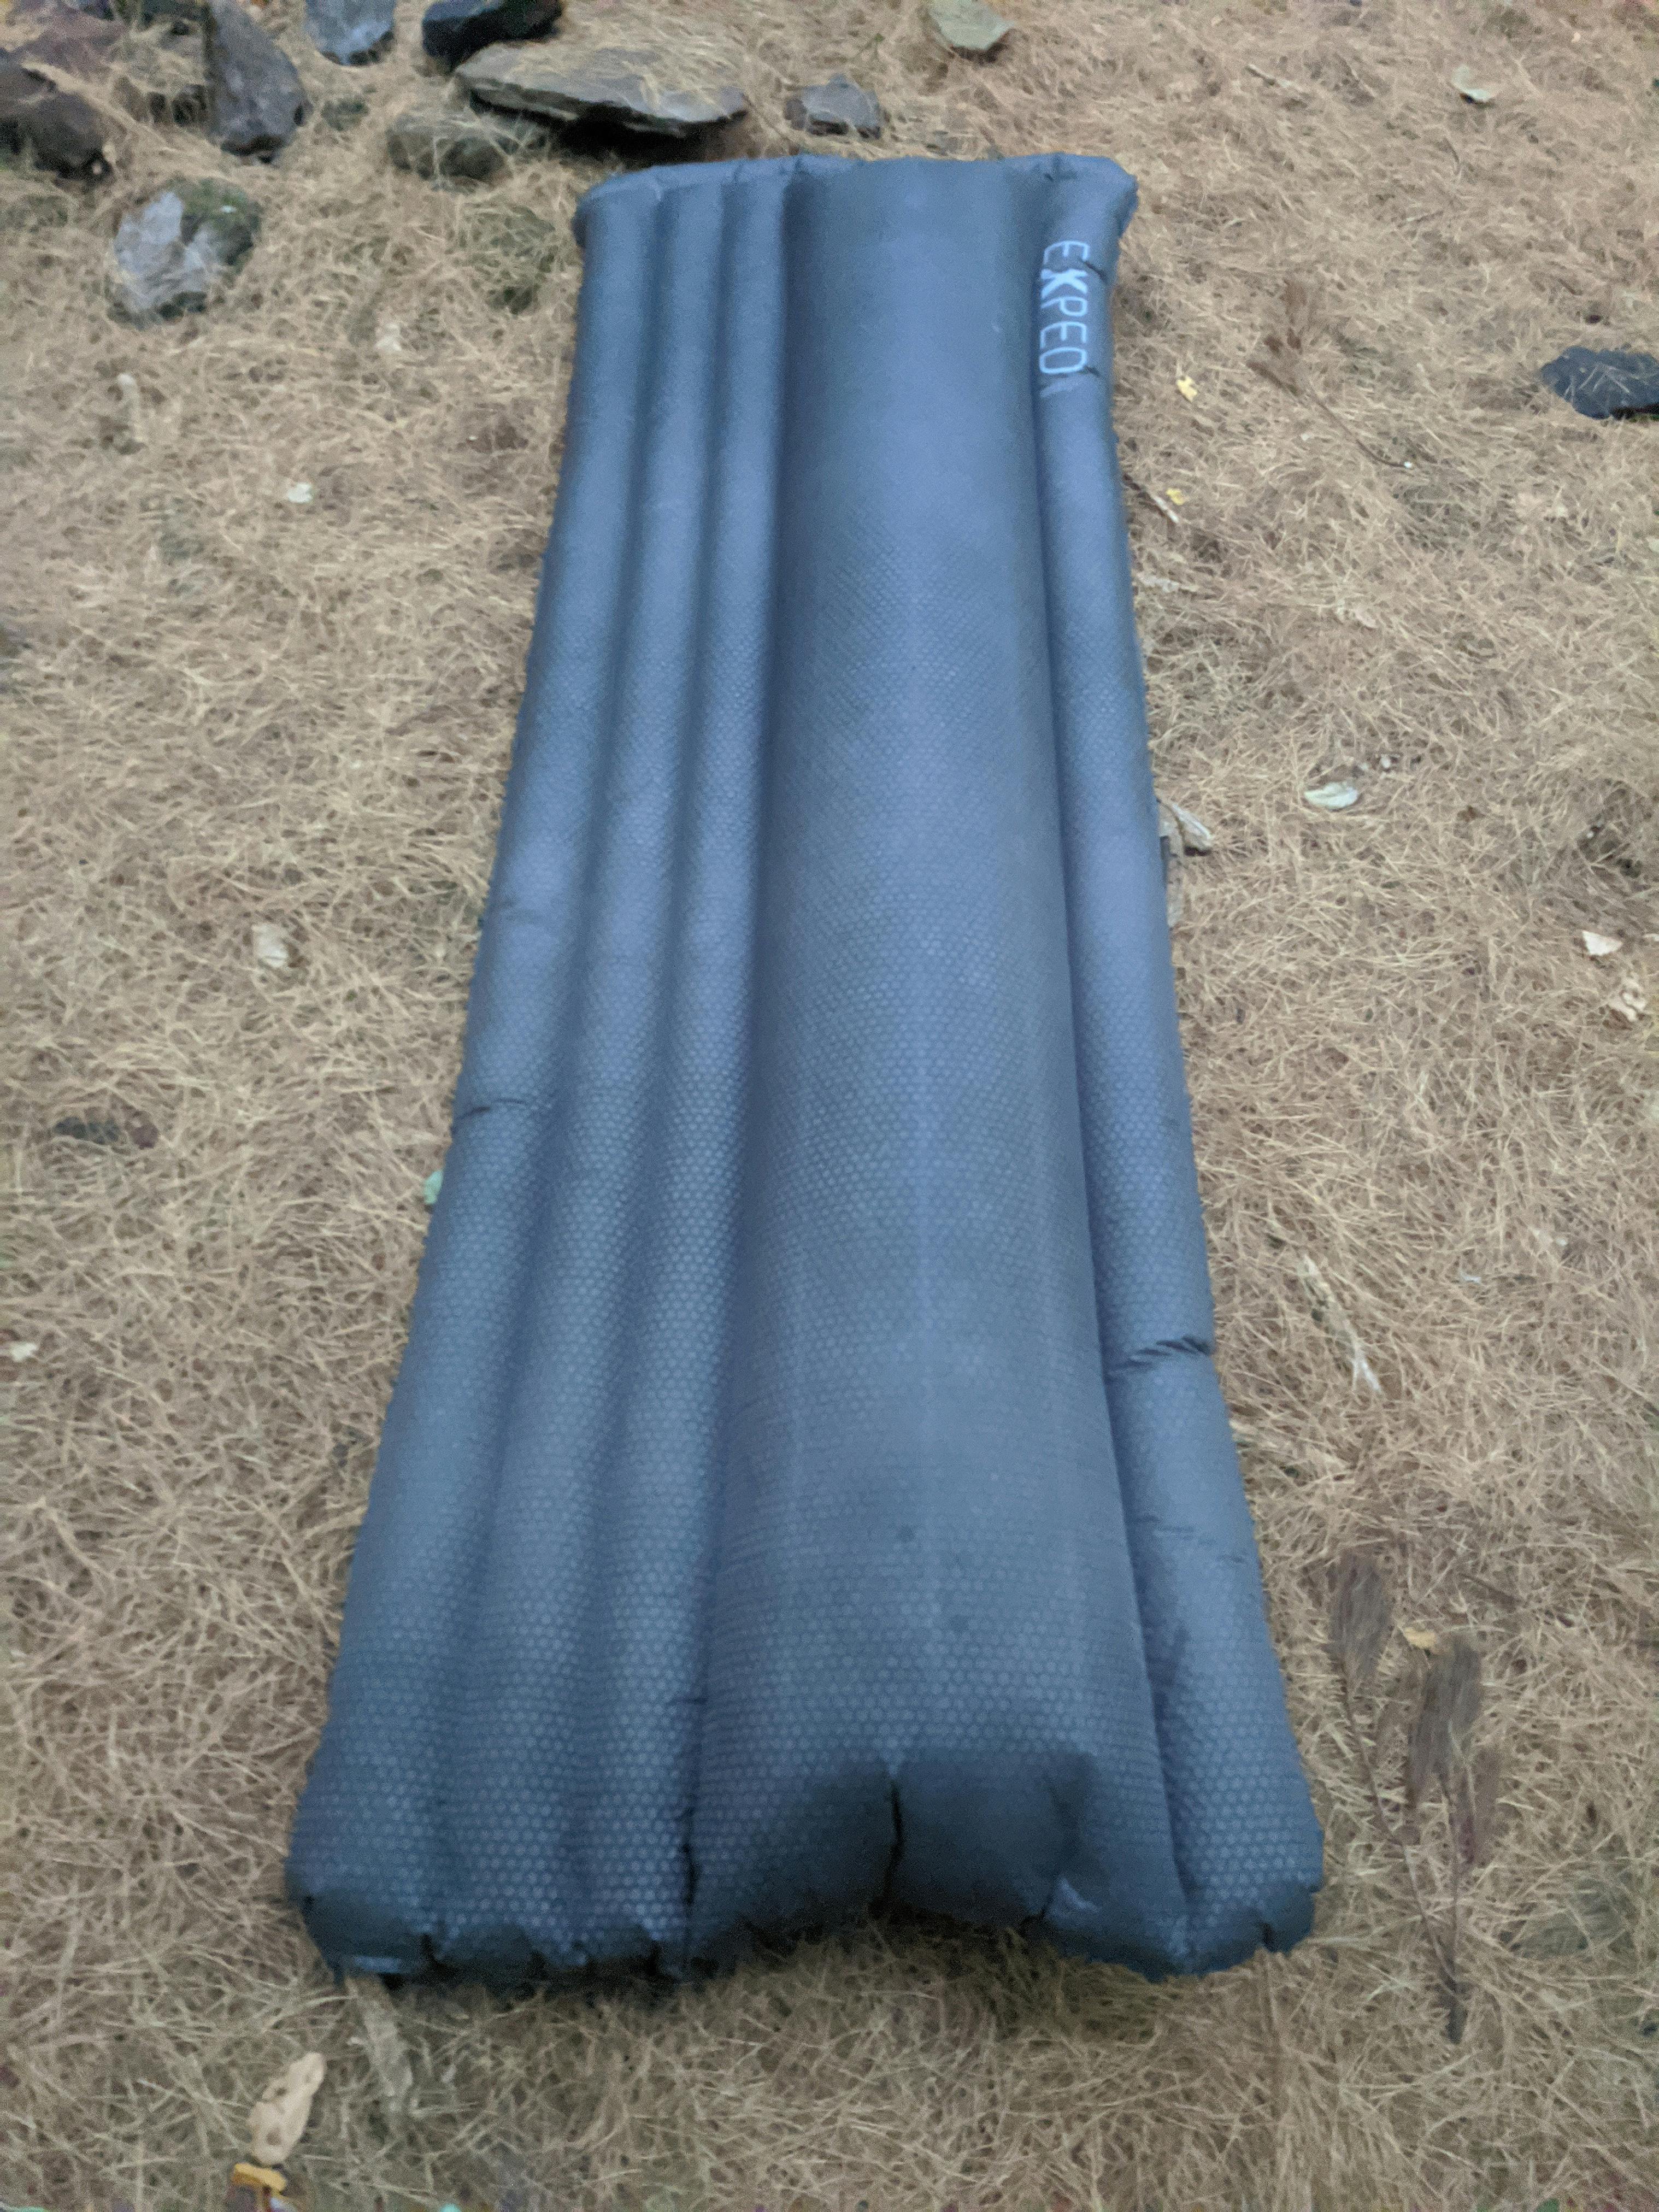 Expert Review: Exped DownMat HL Winter Sleeping Pad | Curated.com